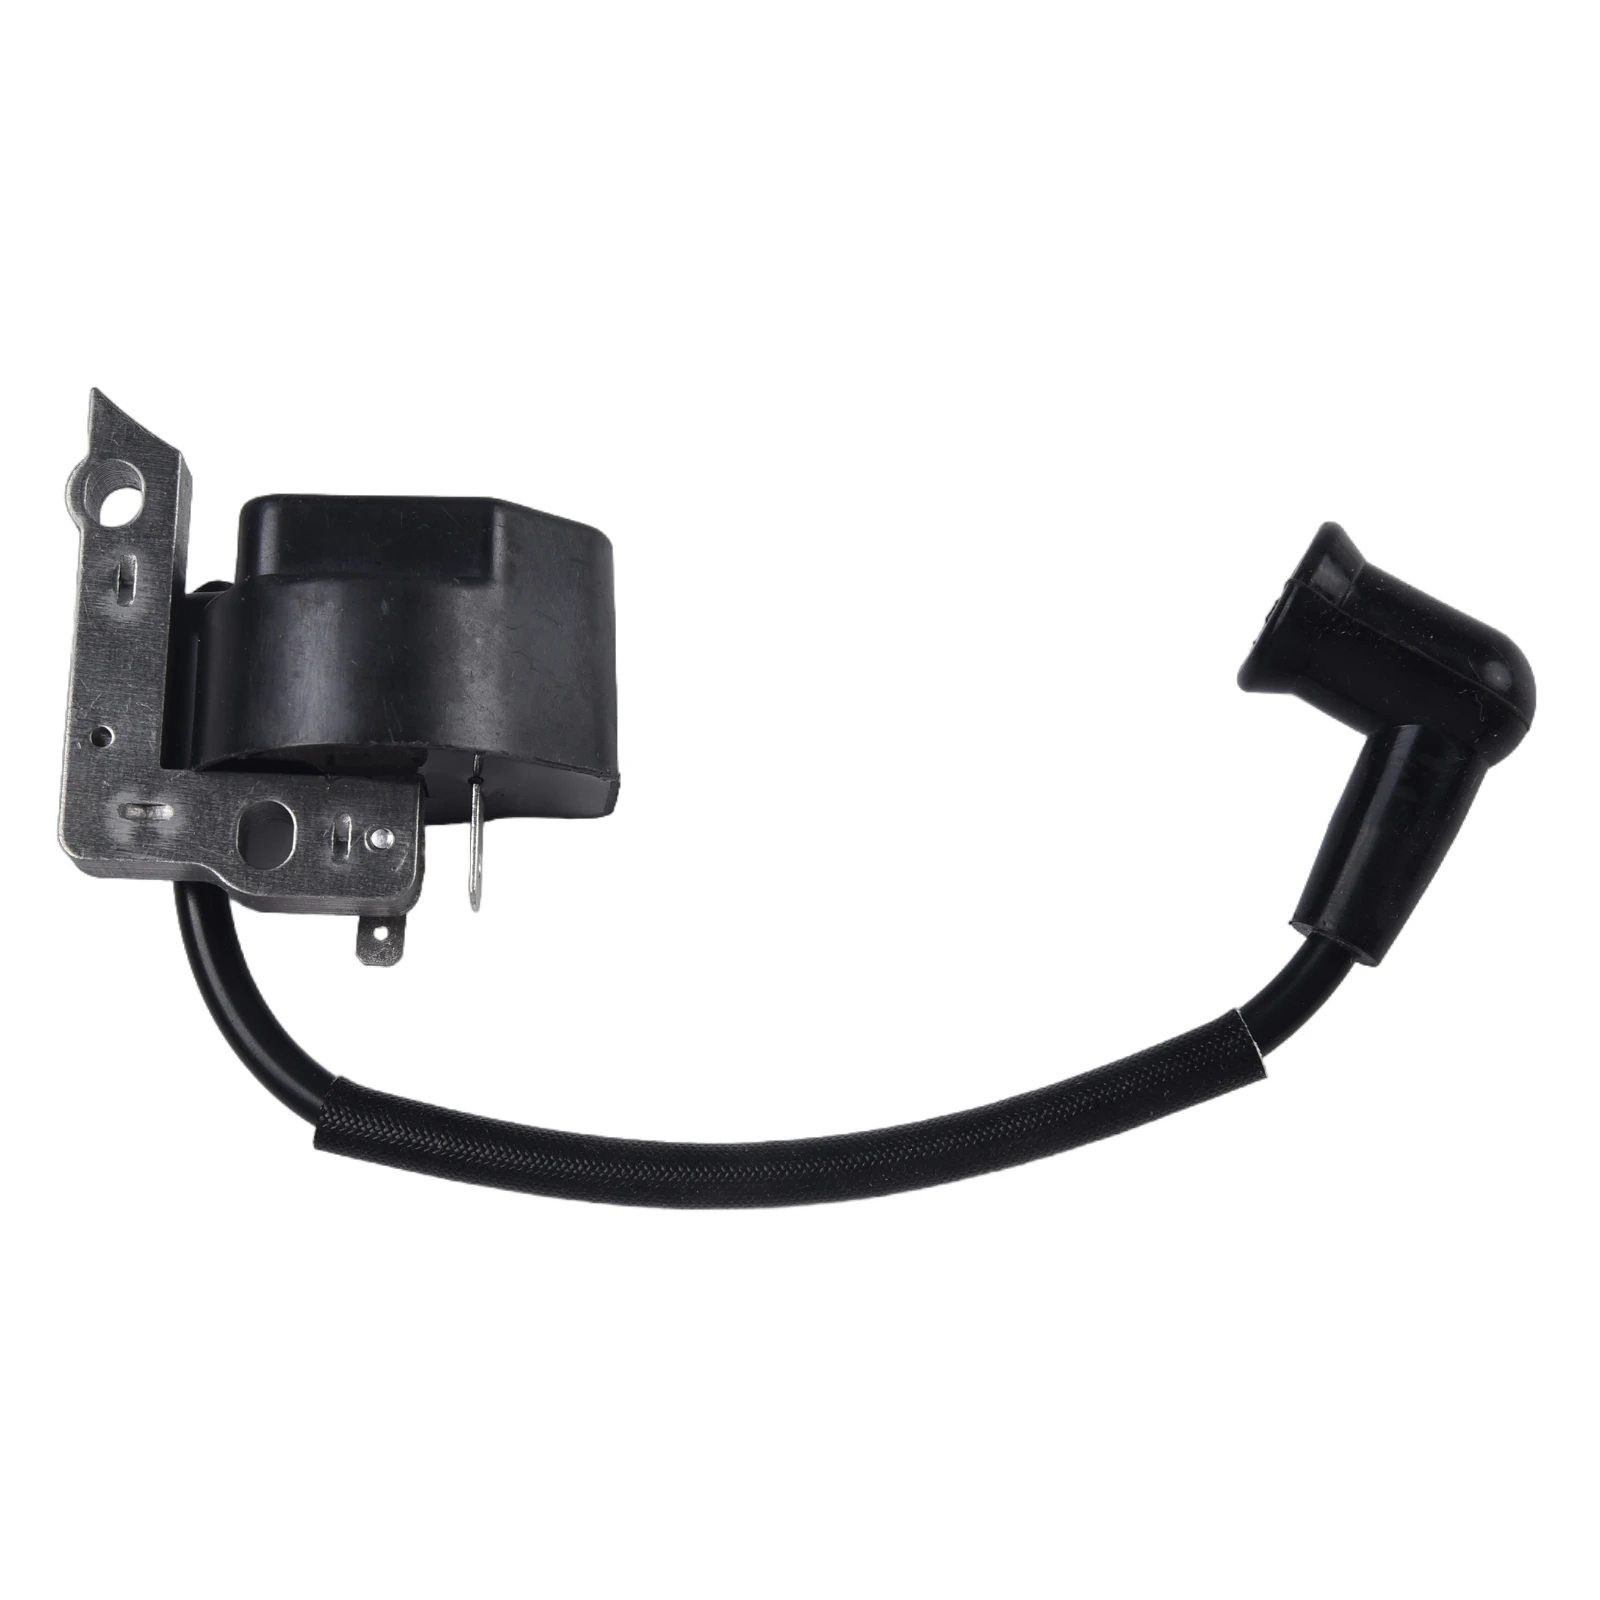 

Replacement Easy Installation Ignition Coil String Trimmer Parts Replace Part 1309 1311 FS 55 2MIX Brushcutter